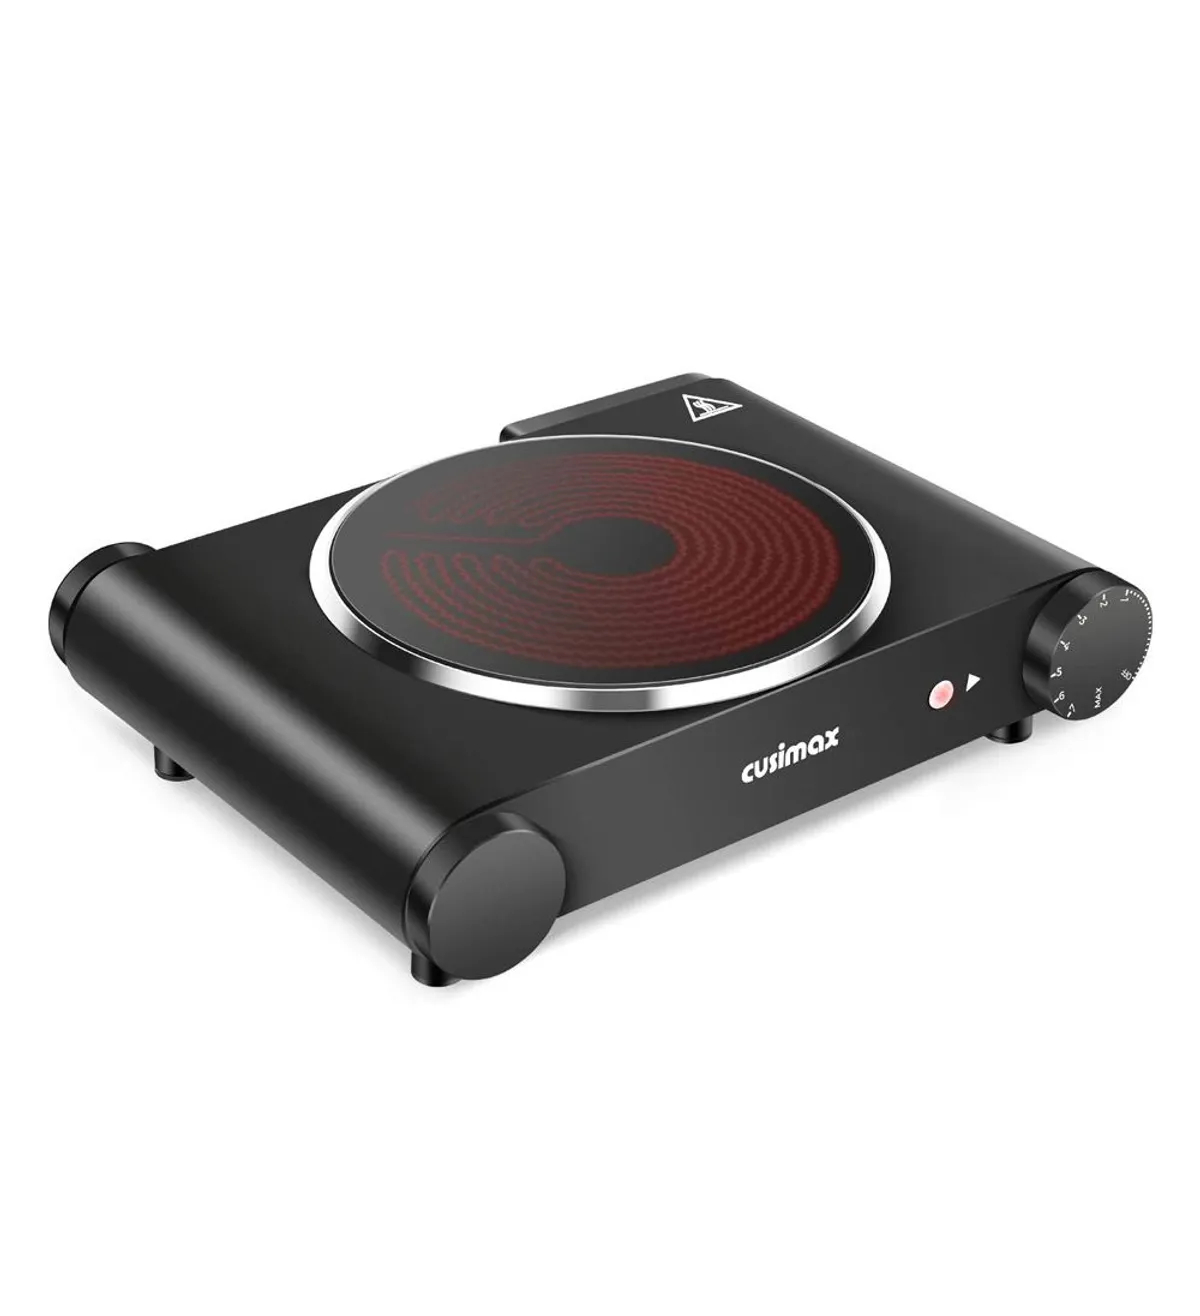 Cusimax Portable Electric Stove review